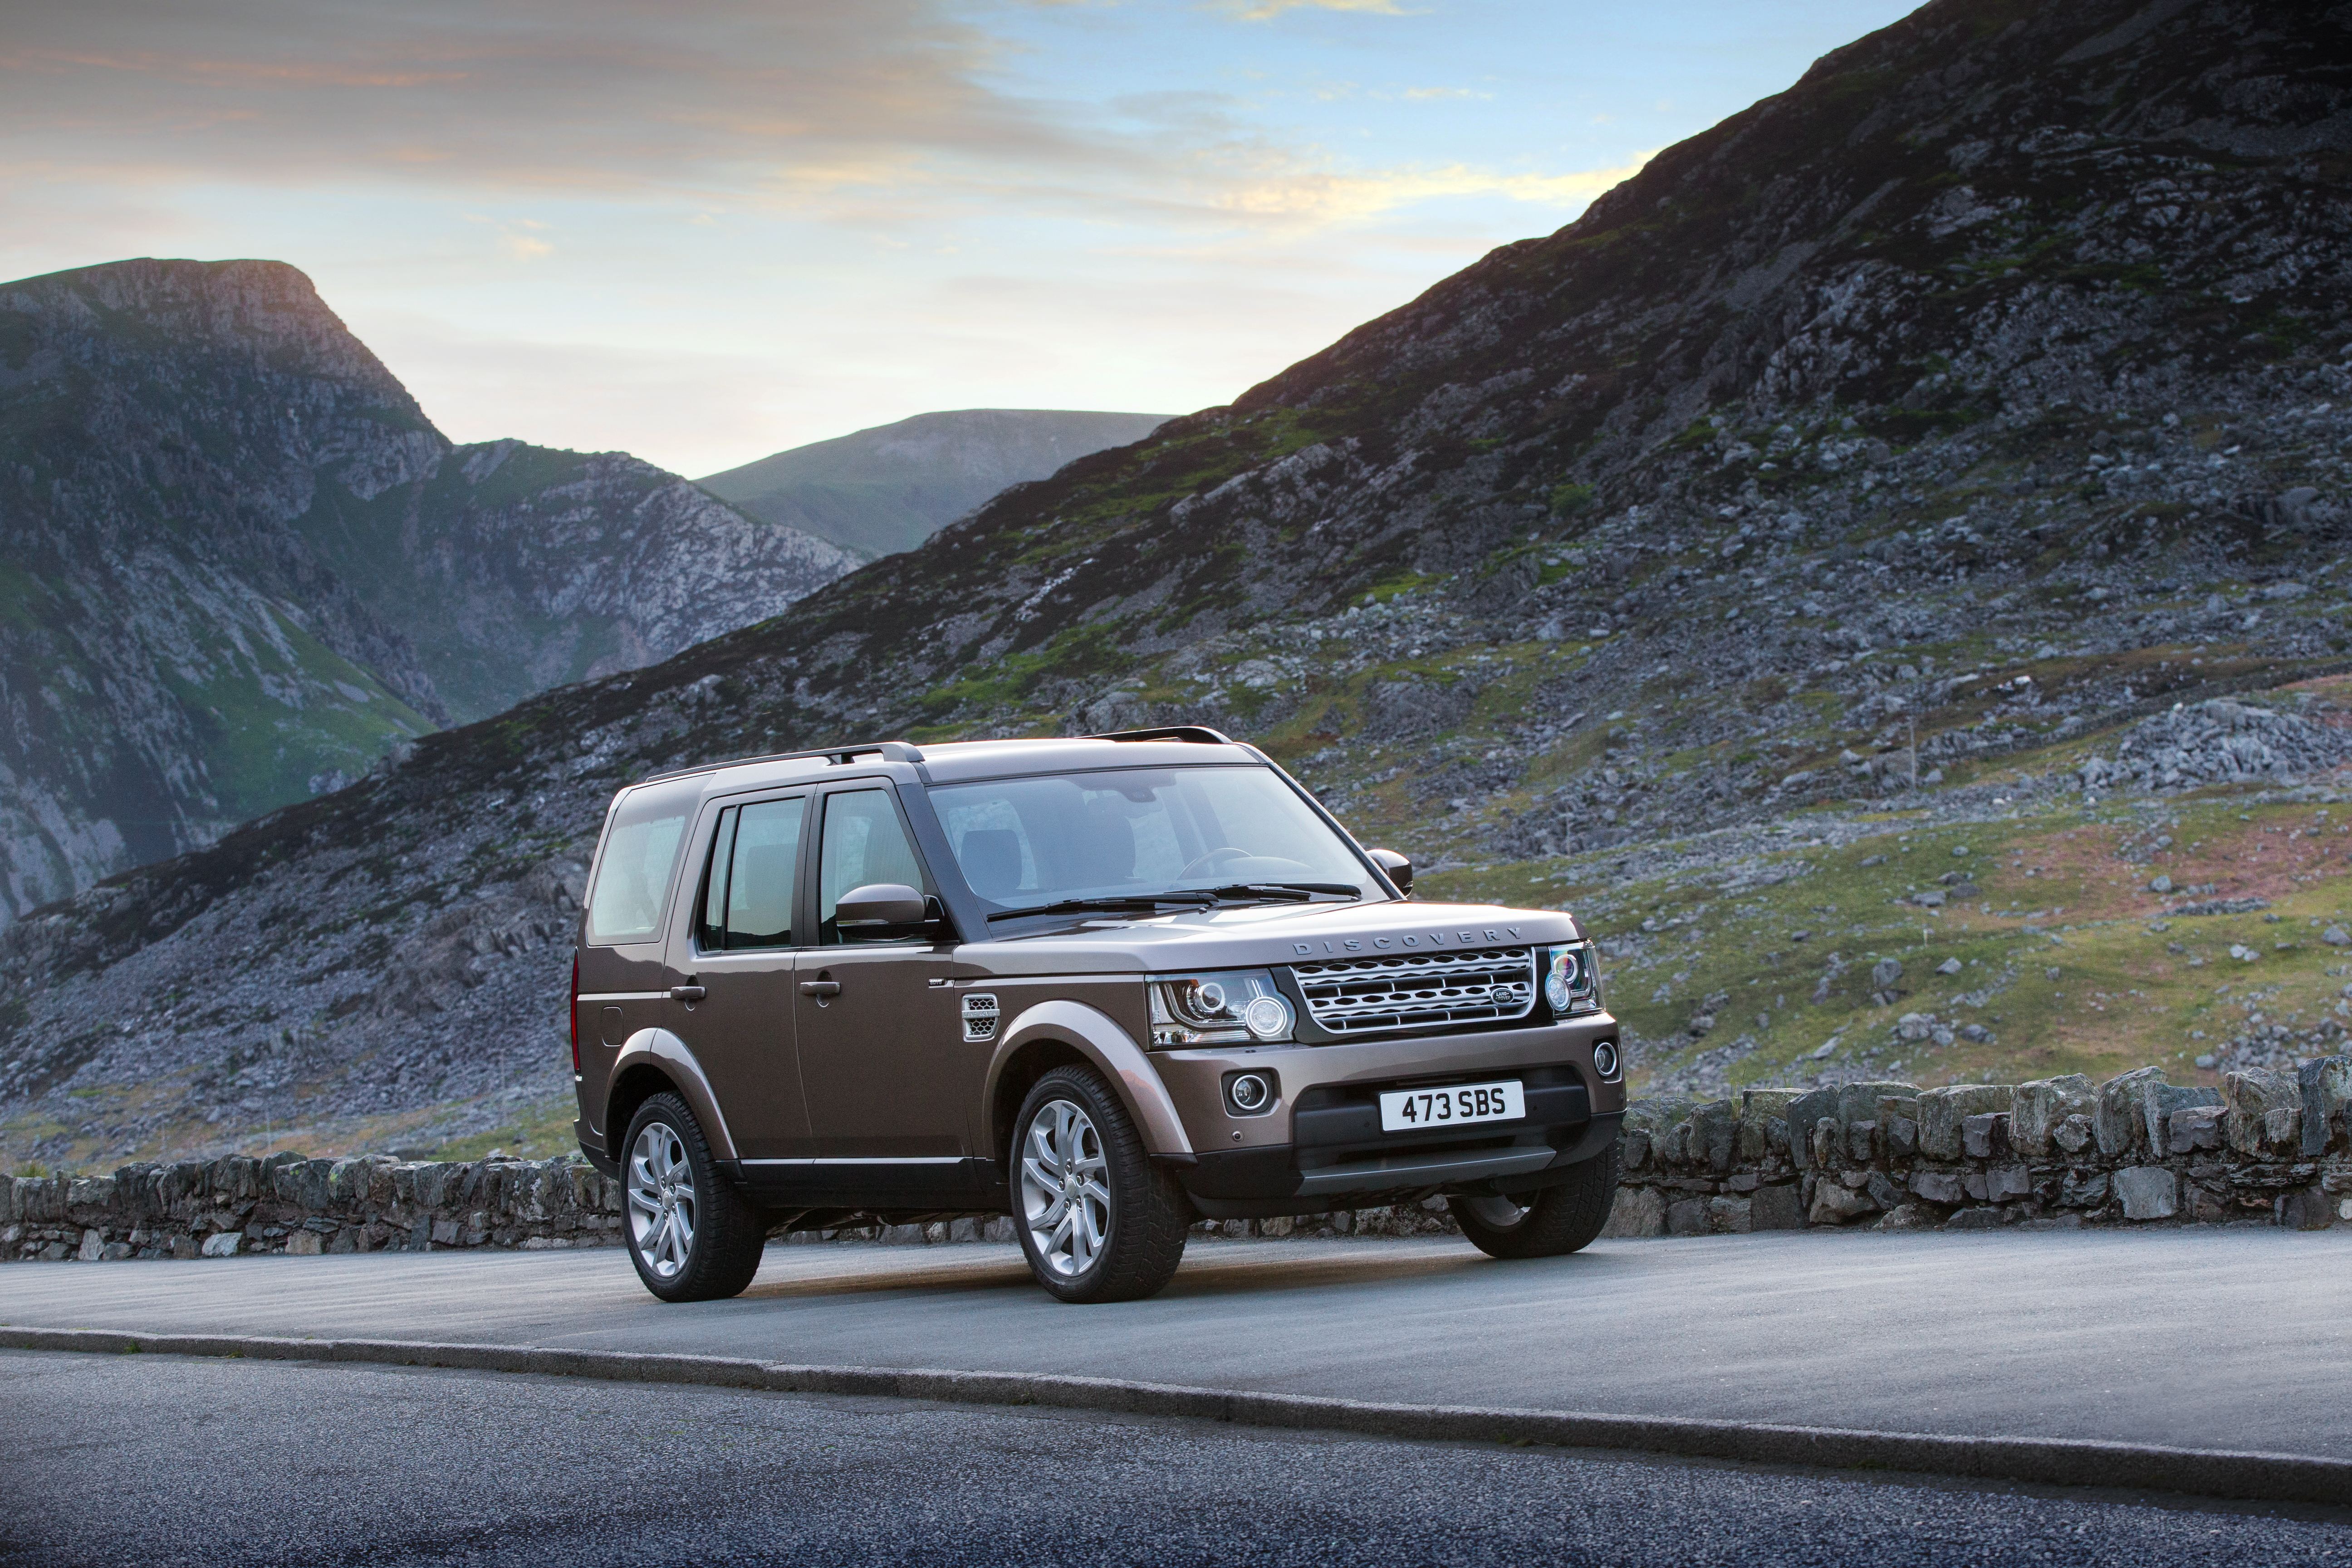 Mauve zwaard Auto Land Rover Discovery review - price, specs and 0-60 time | evo